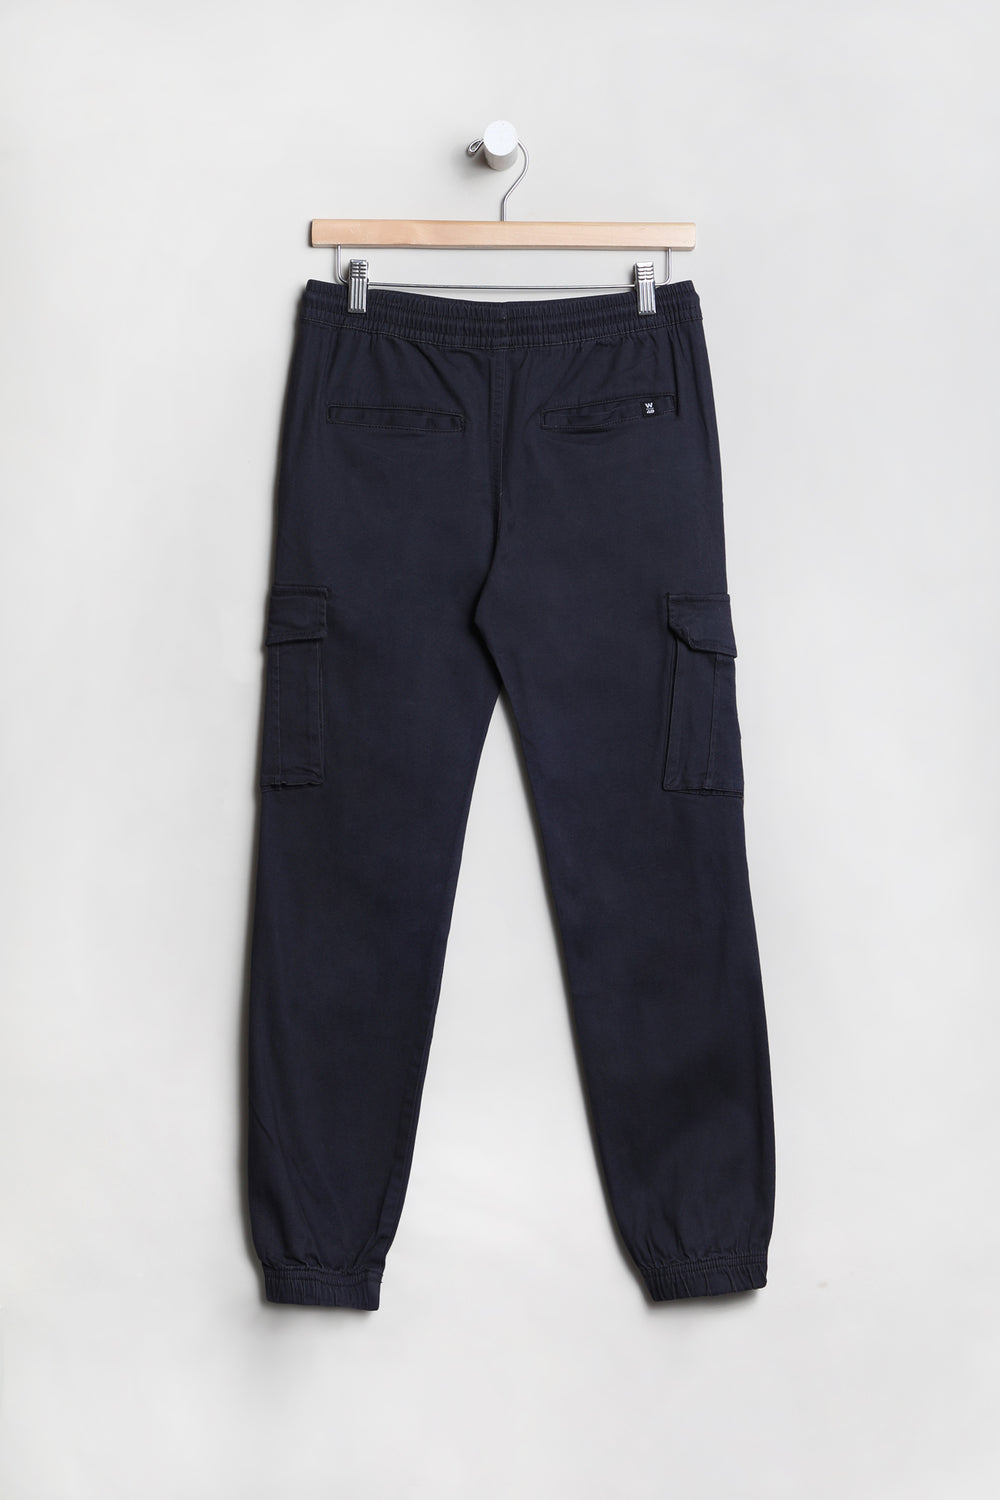 West49 Youth Twill Cargo Jogger West49 Youth Twill Cargo Jogger